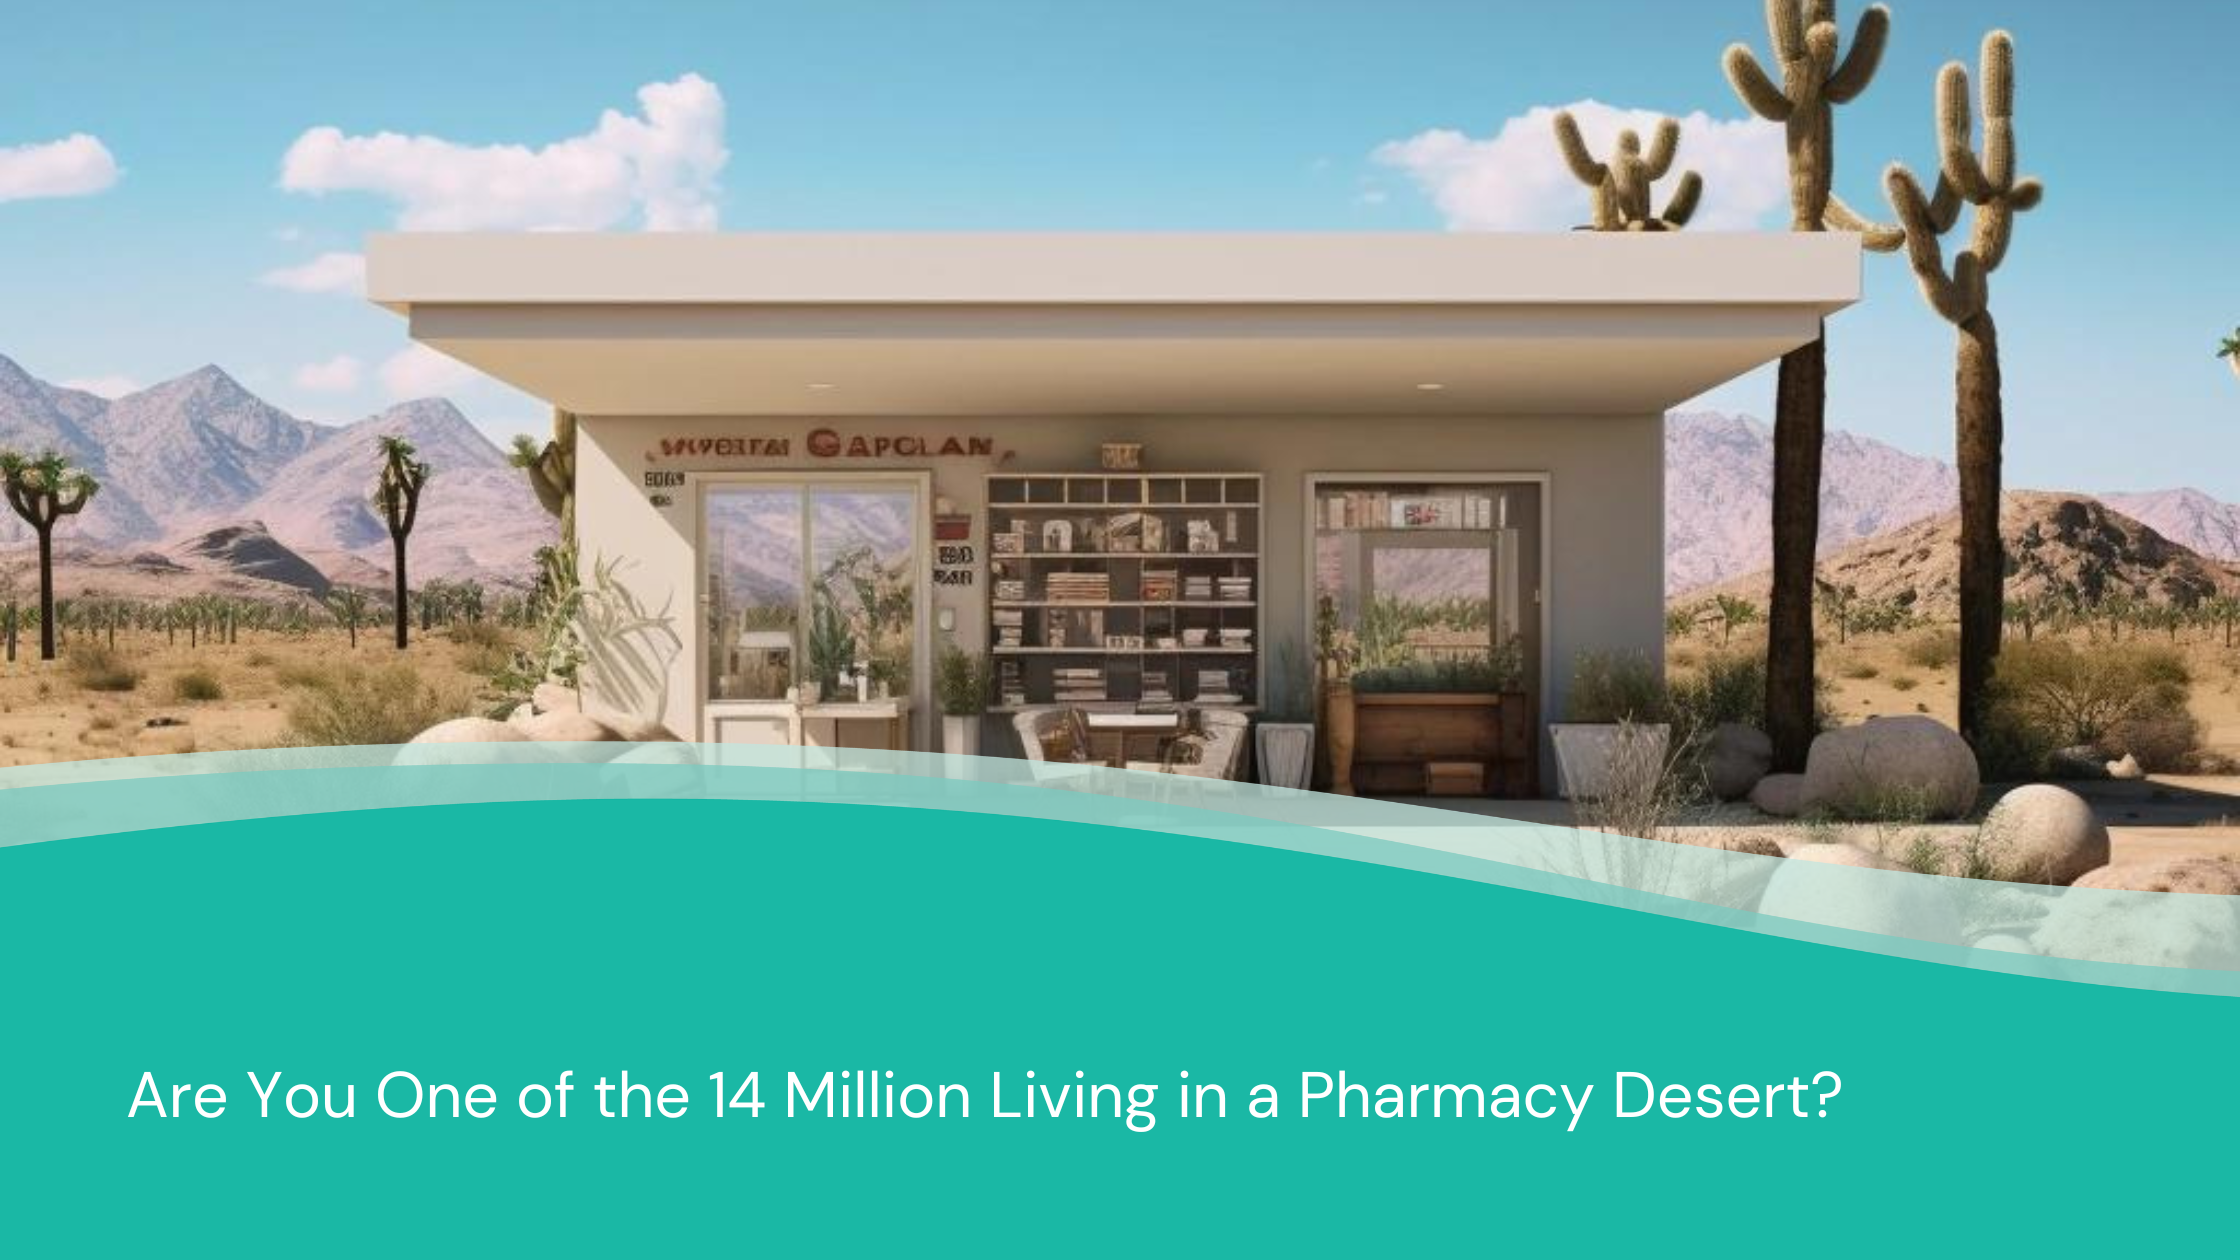 Are You One of the 14 Million Living in a Pharmacy Desert?